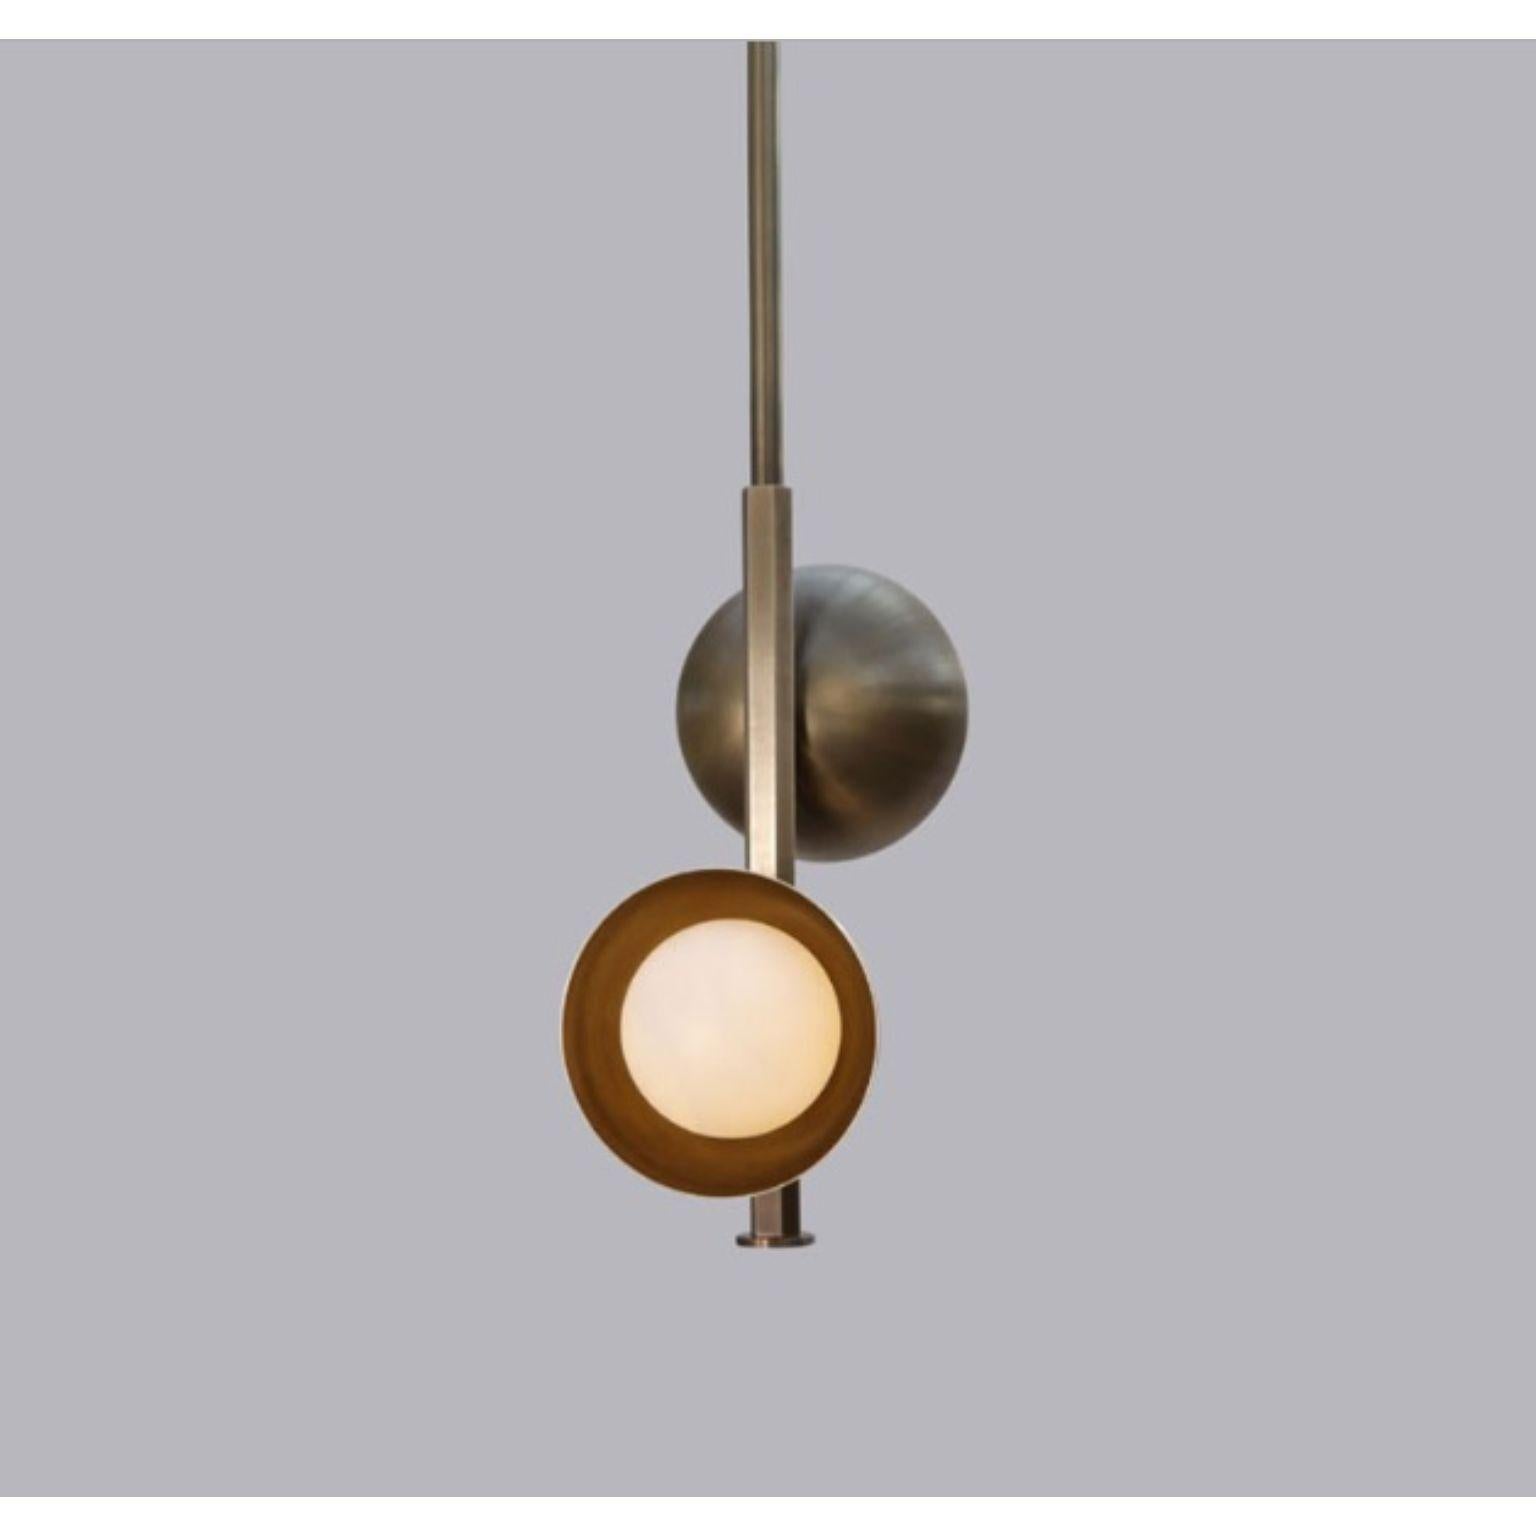 Stem 2 Brass Dome Pendant Lamp by Lamp Shaper
Dimensions: D 23 x W 23 x H 101.5 cm.
Materials: Brass.

Different finishes available: raw brass, aged brass, burnt brass and brushed brass Please contact us.

All our lamps can be wired according to